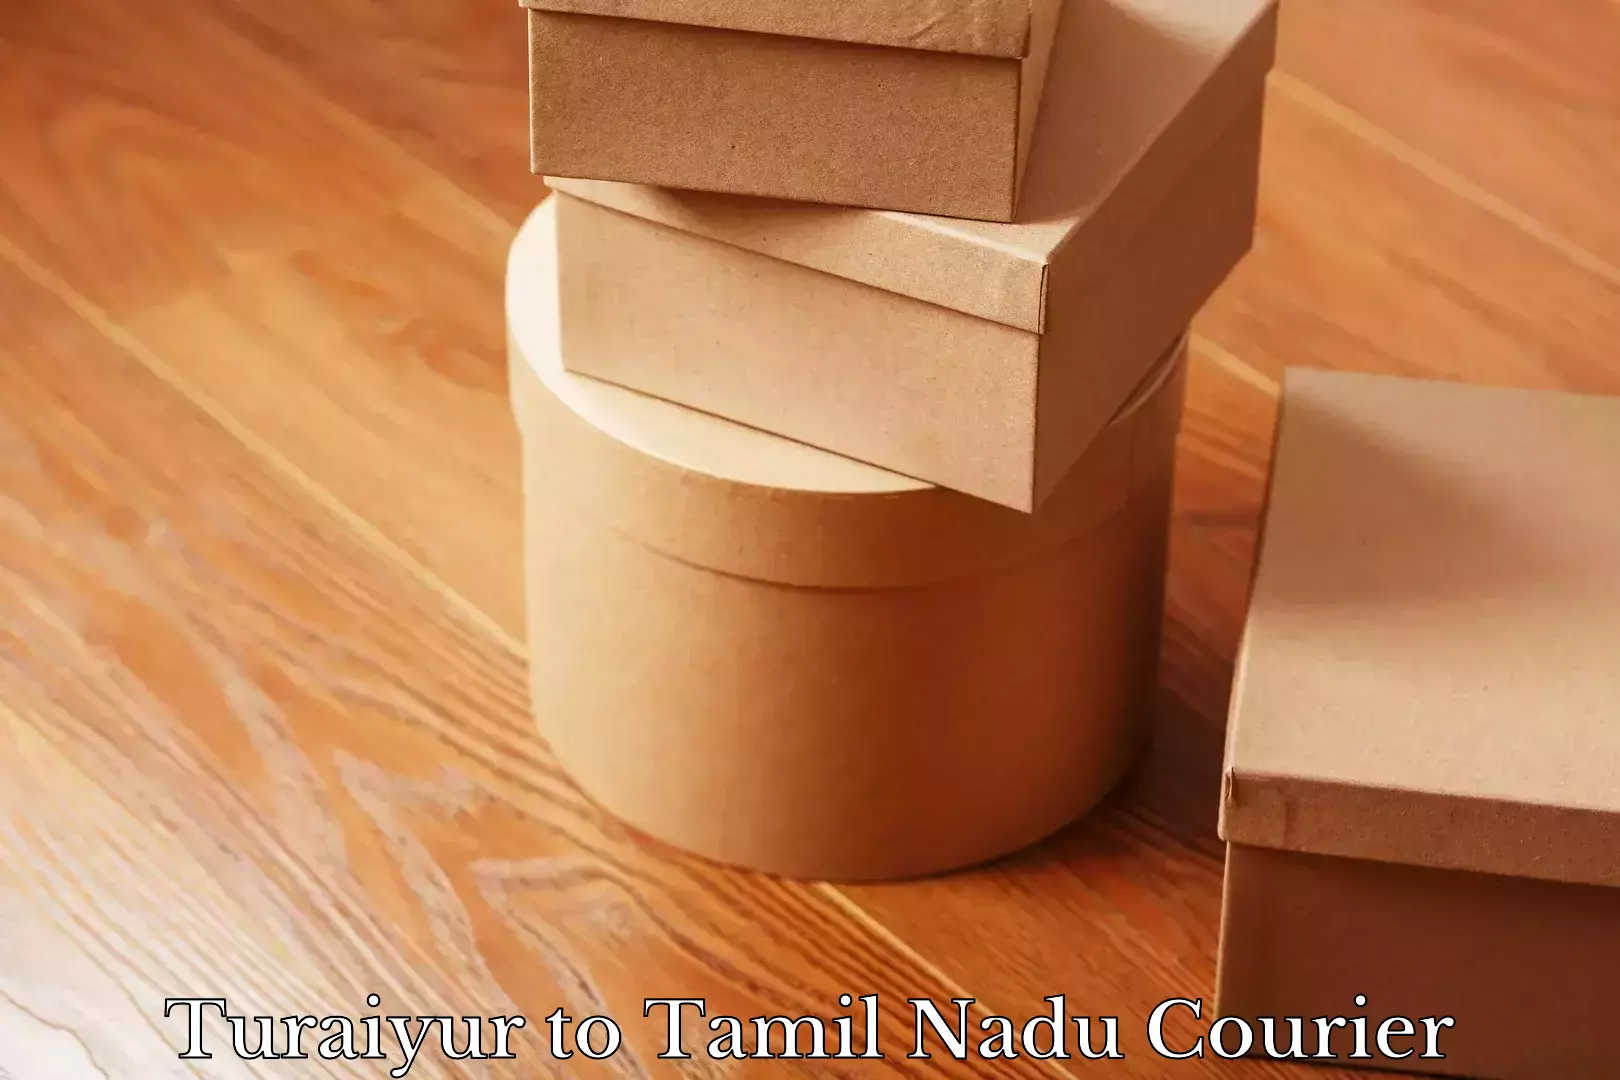 Rapid freight solutions Turaiyur to Tamil Nadu